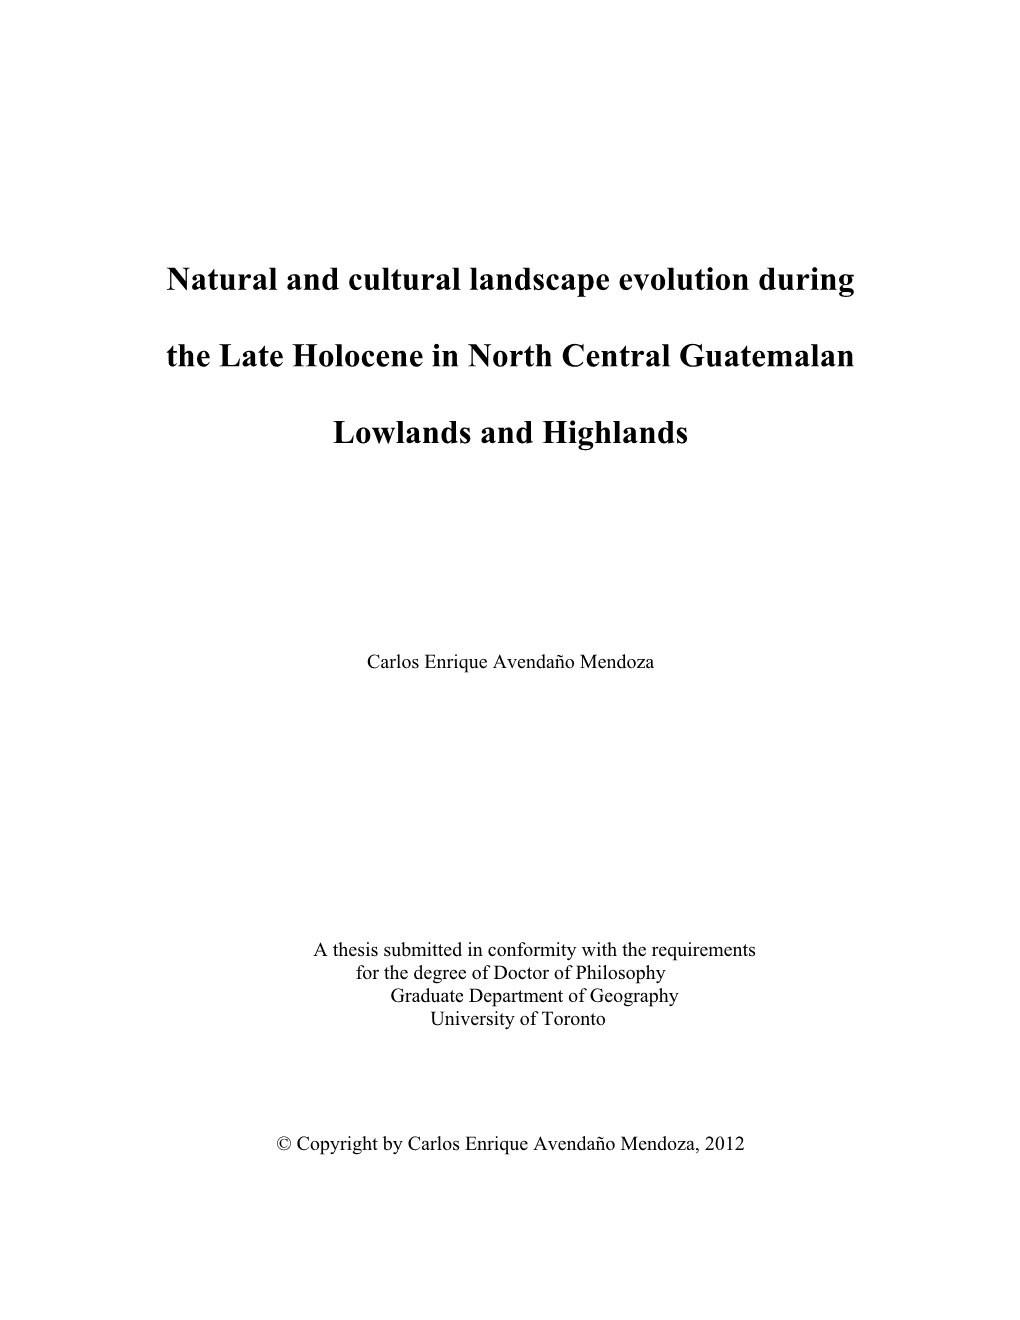 Natural and Cultural Landscape Evolution During the Late Holocene in North Central Guatemalan